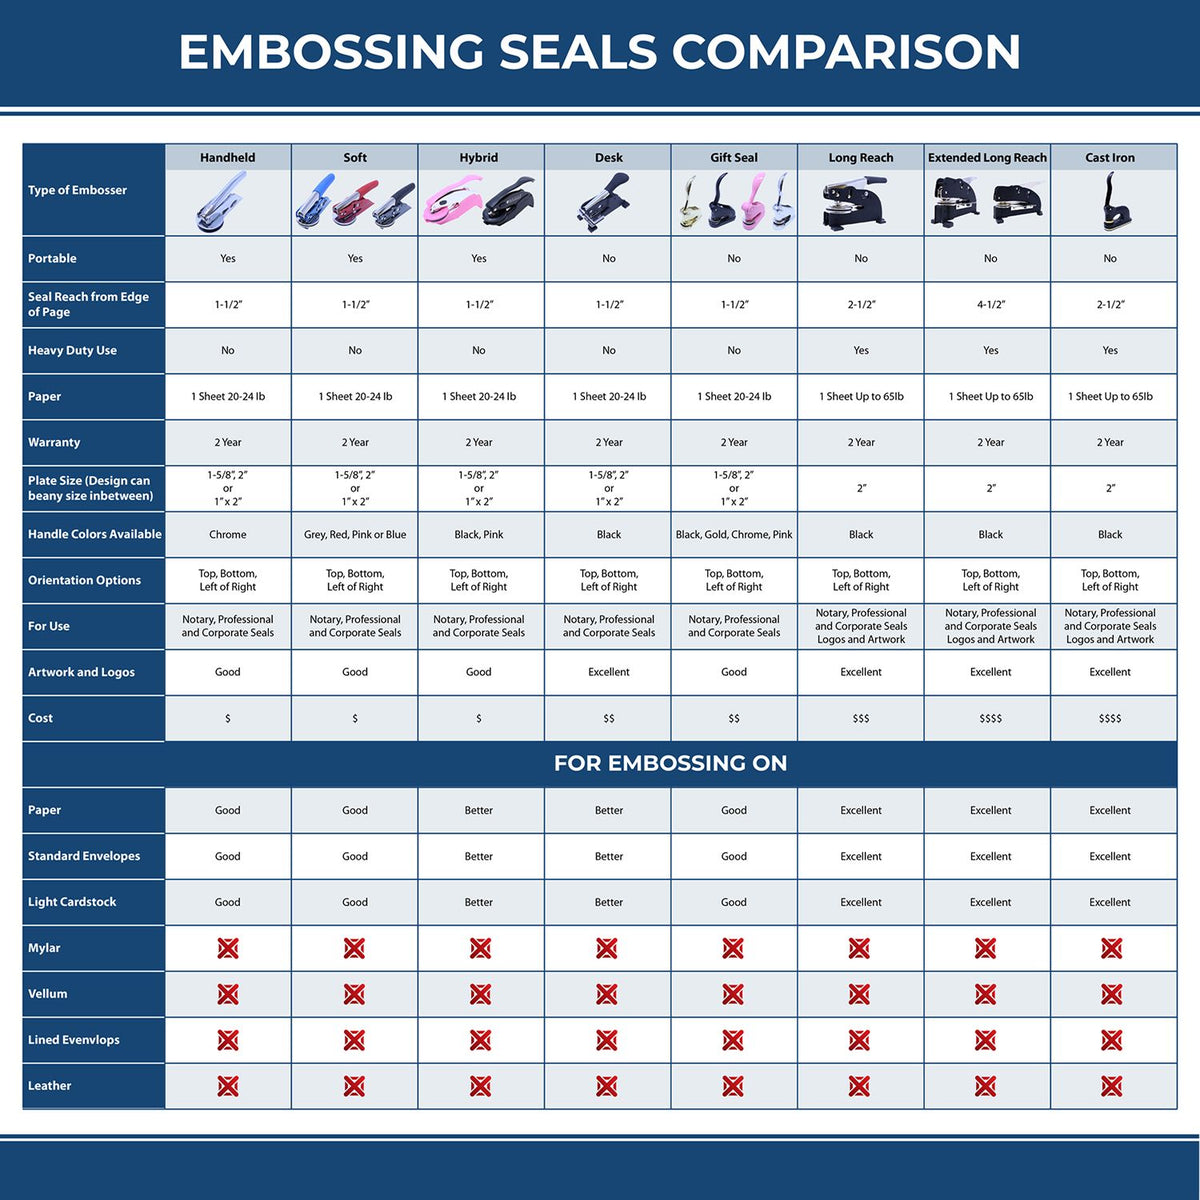 A comparison chart for the different types of mount models available for the Soft Pocket West Virginia Landscape Architect Embosser.